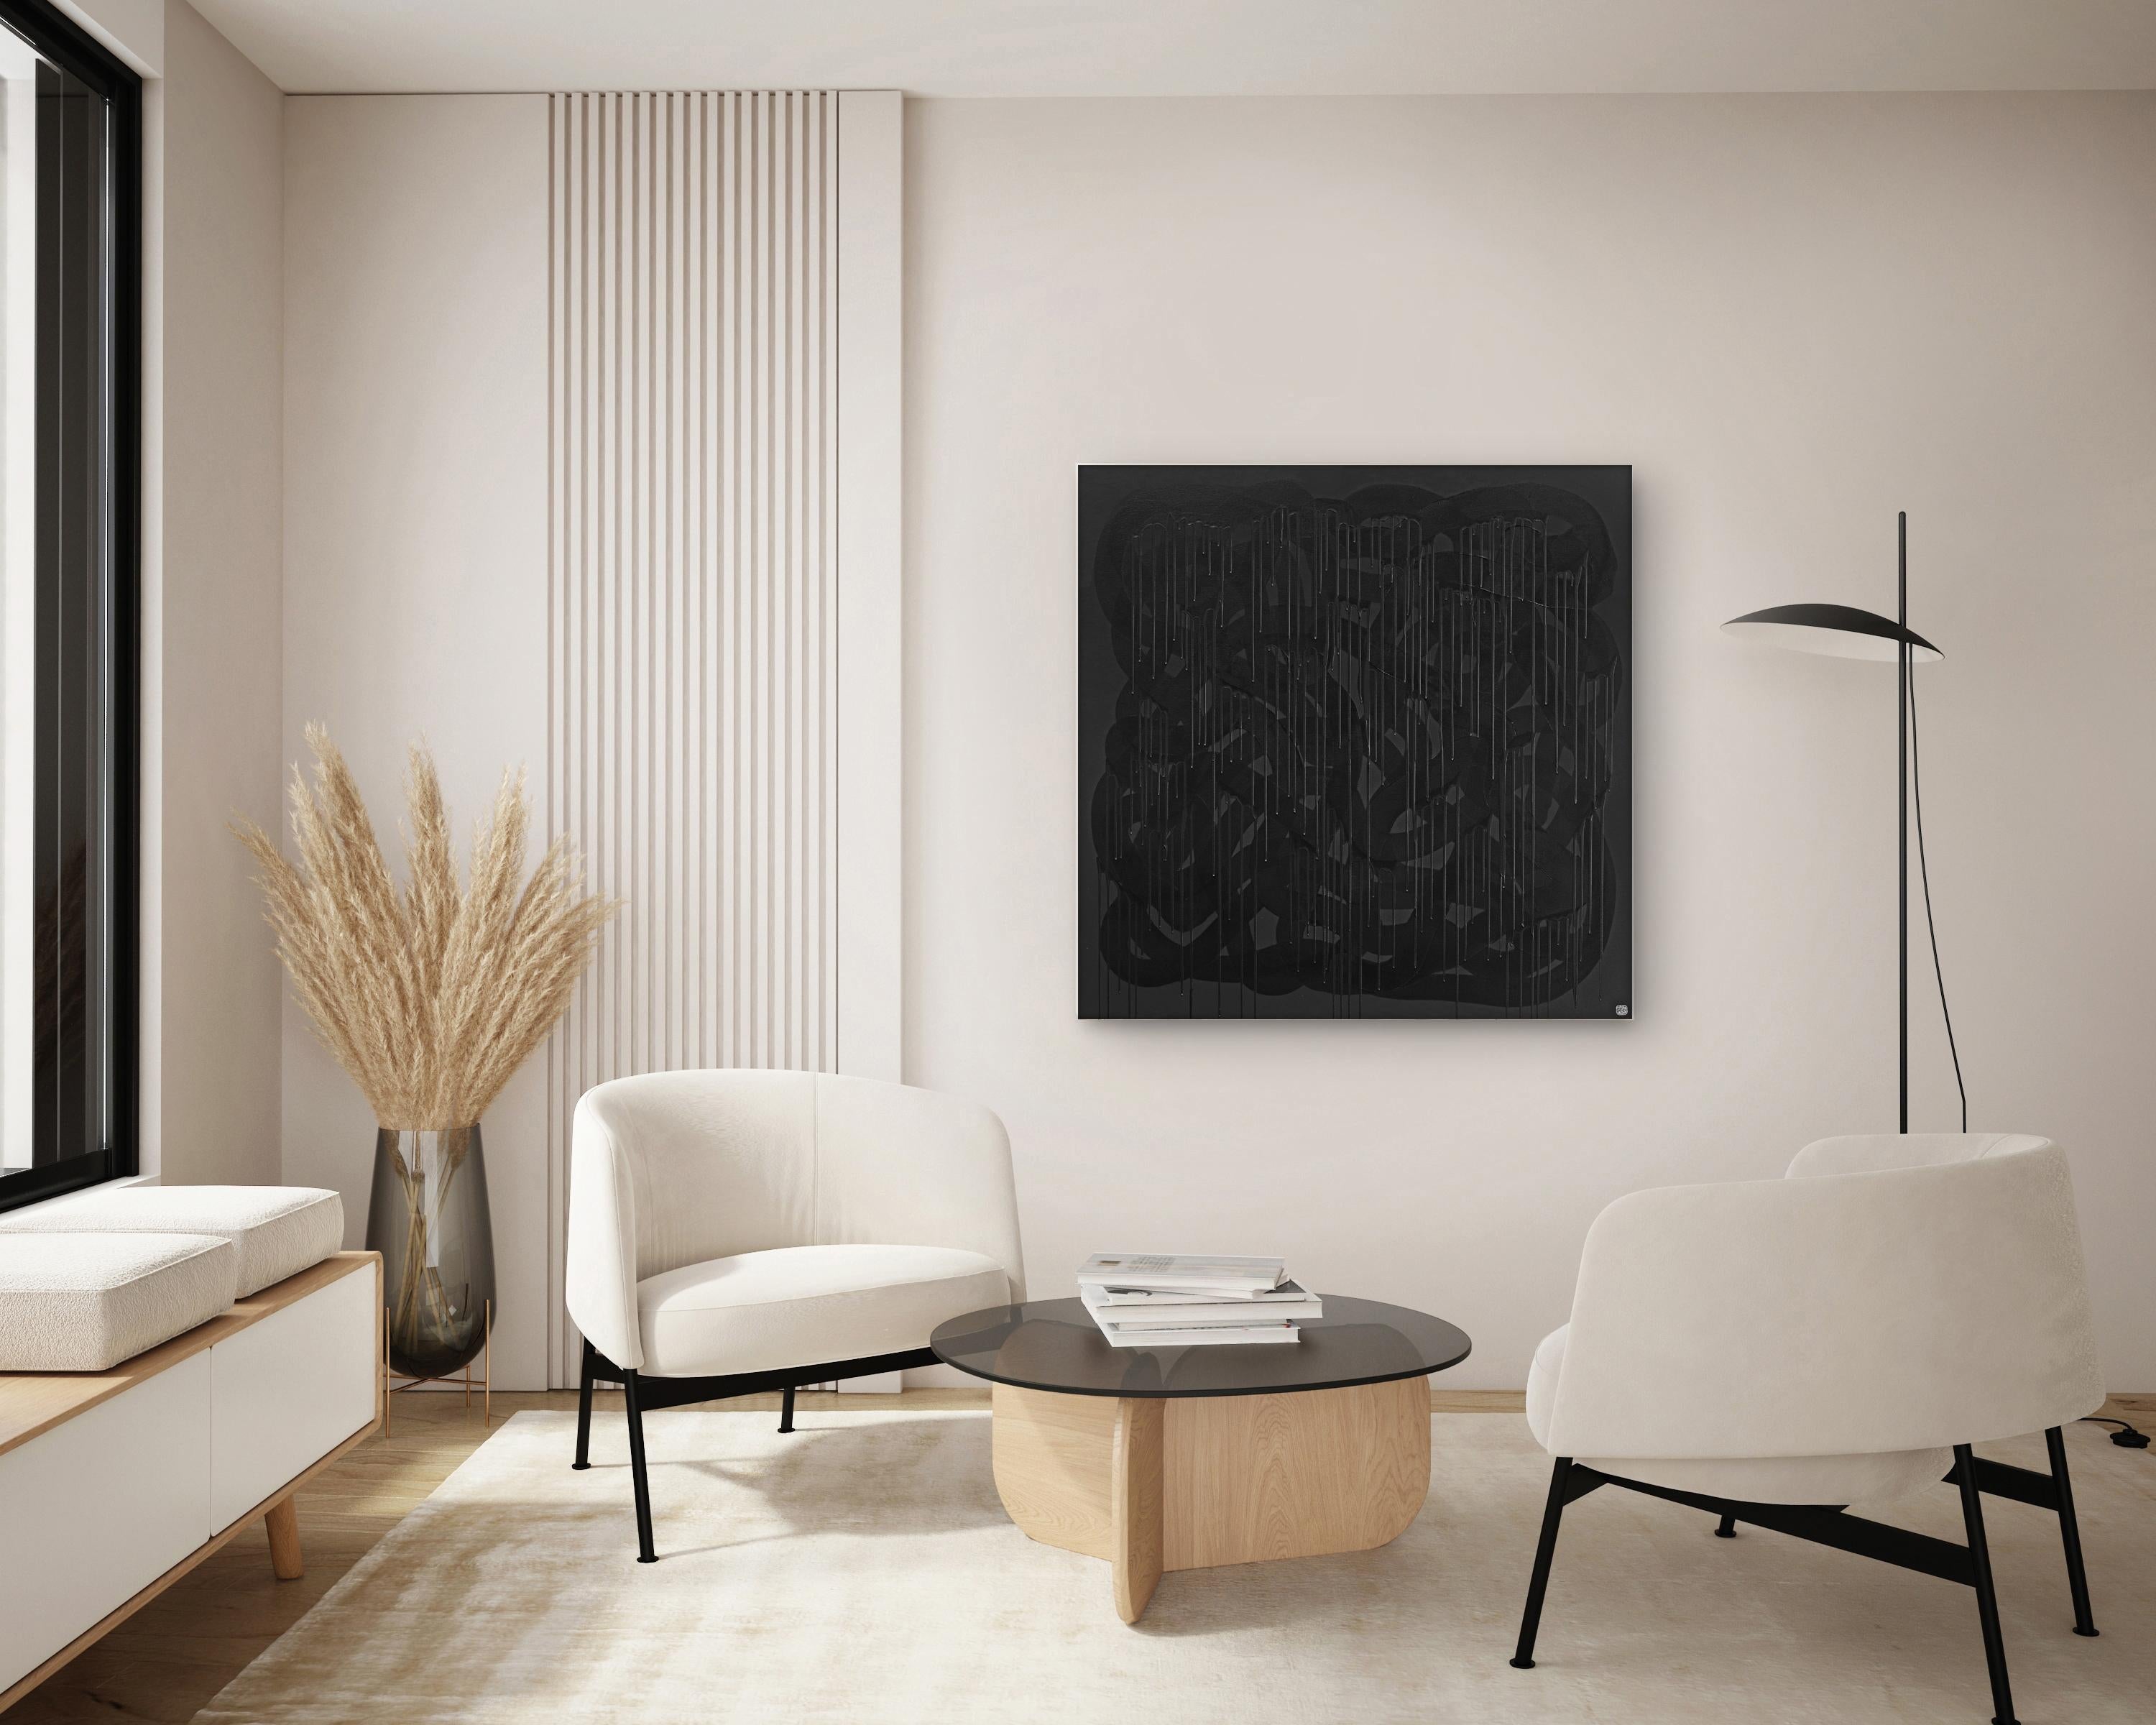 Abstract minimalist artist Jason DeMeo creates artworks that work to serve as a meditation for the viewer, drawing them toward the timeless concepts of truth, beauty, and goodness. His original paintings accentuate the ultimate appreciation of